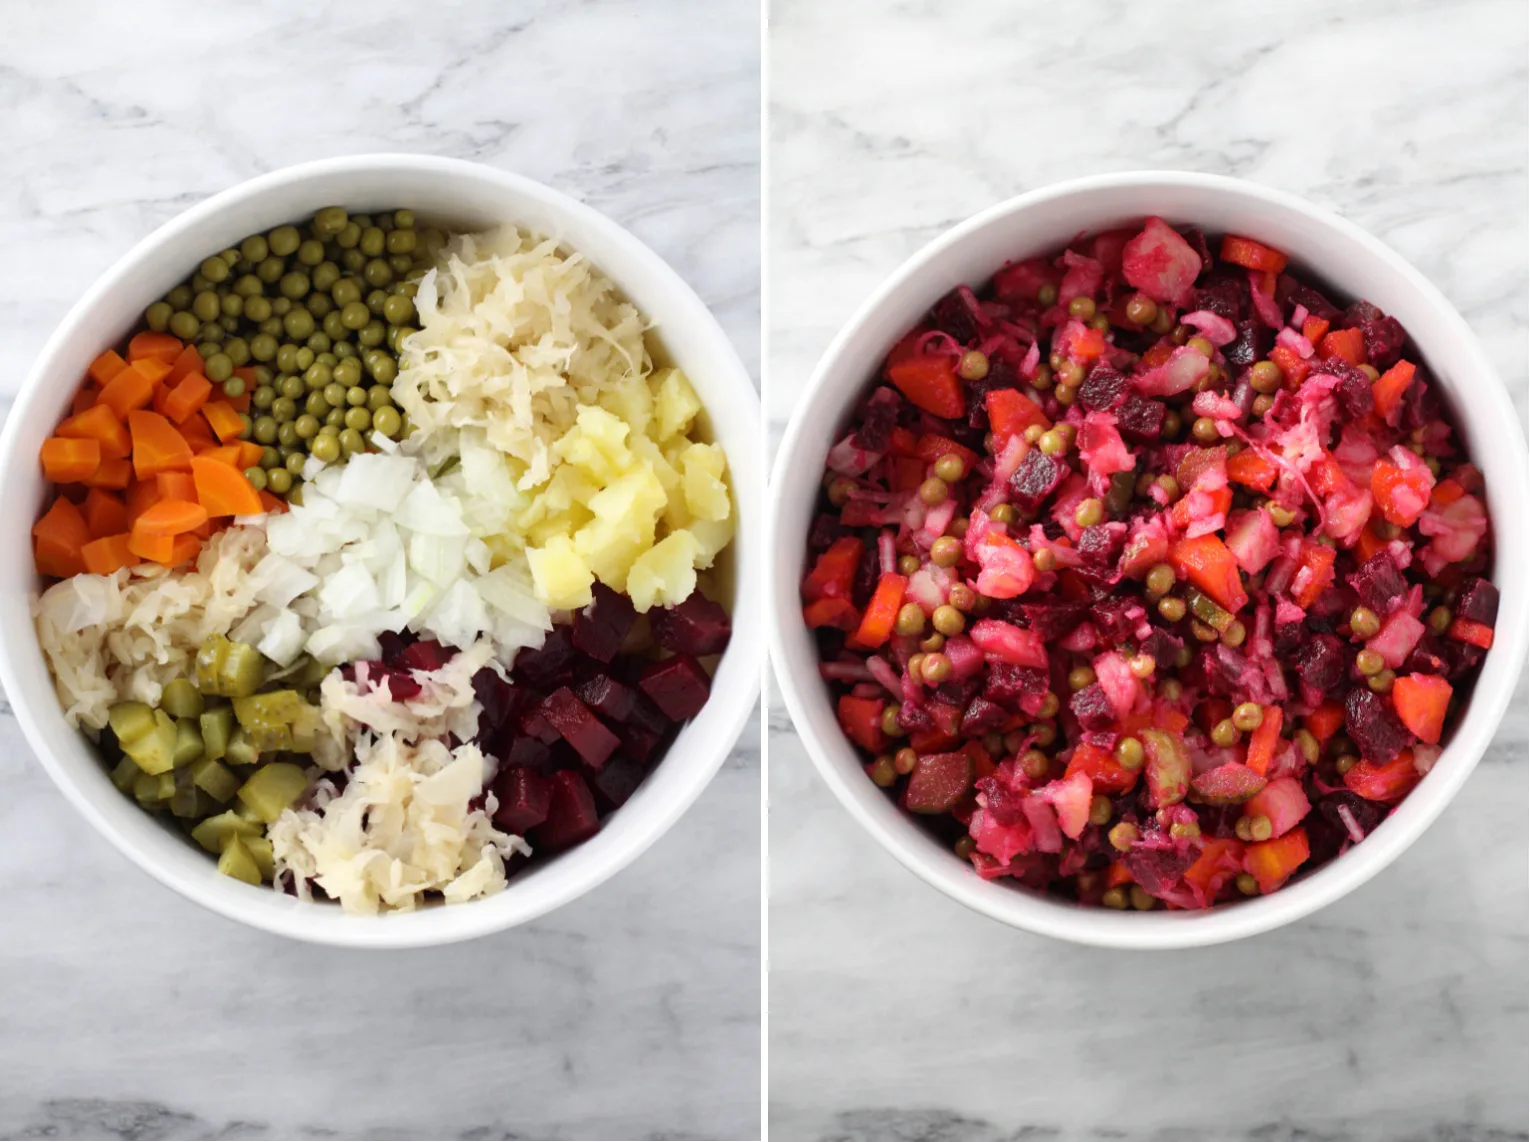 Two side-by-side images. On the left, overhead shot of all the ingredients in a bowl. On the right, tossed ingredients in a bowl.